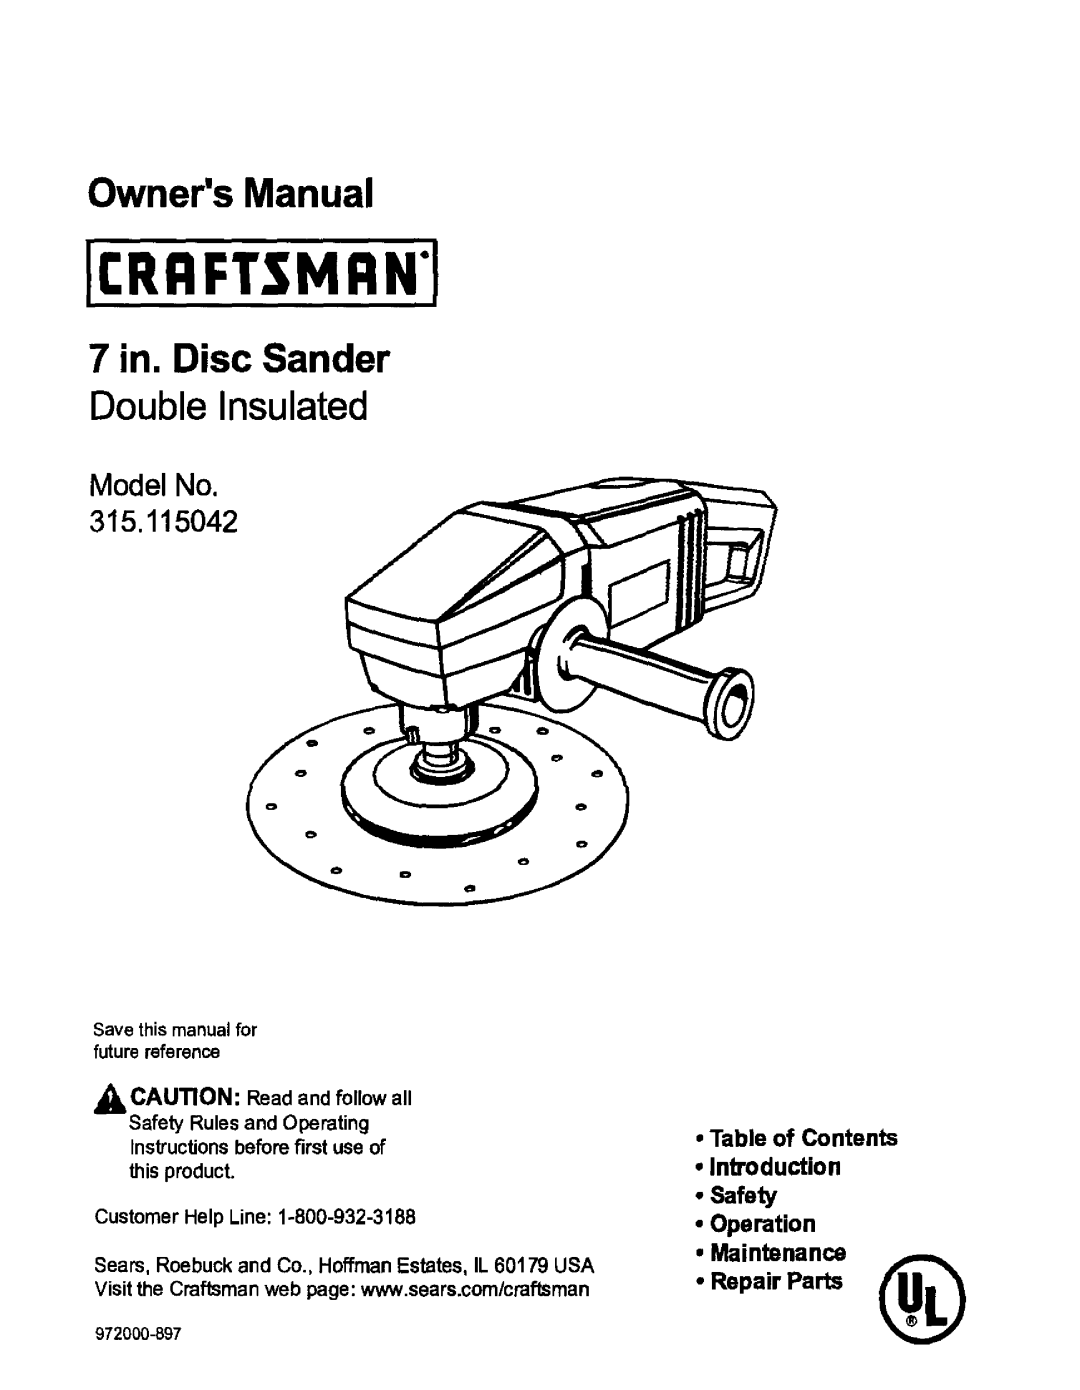 Craftsman 315.115042 owner manual Repair Parts Maintenance, CAUTION Read and follow all, Customer Help Line 